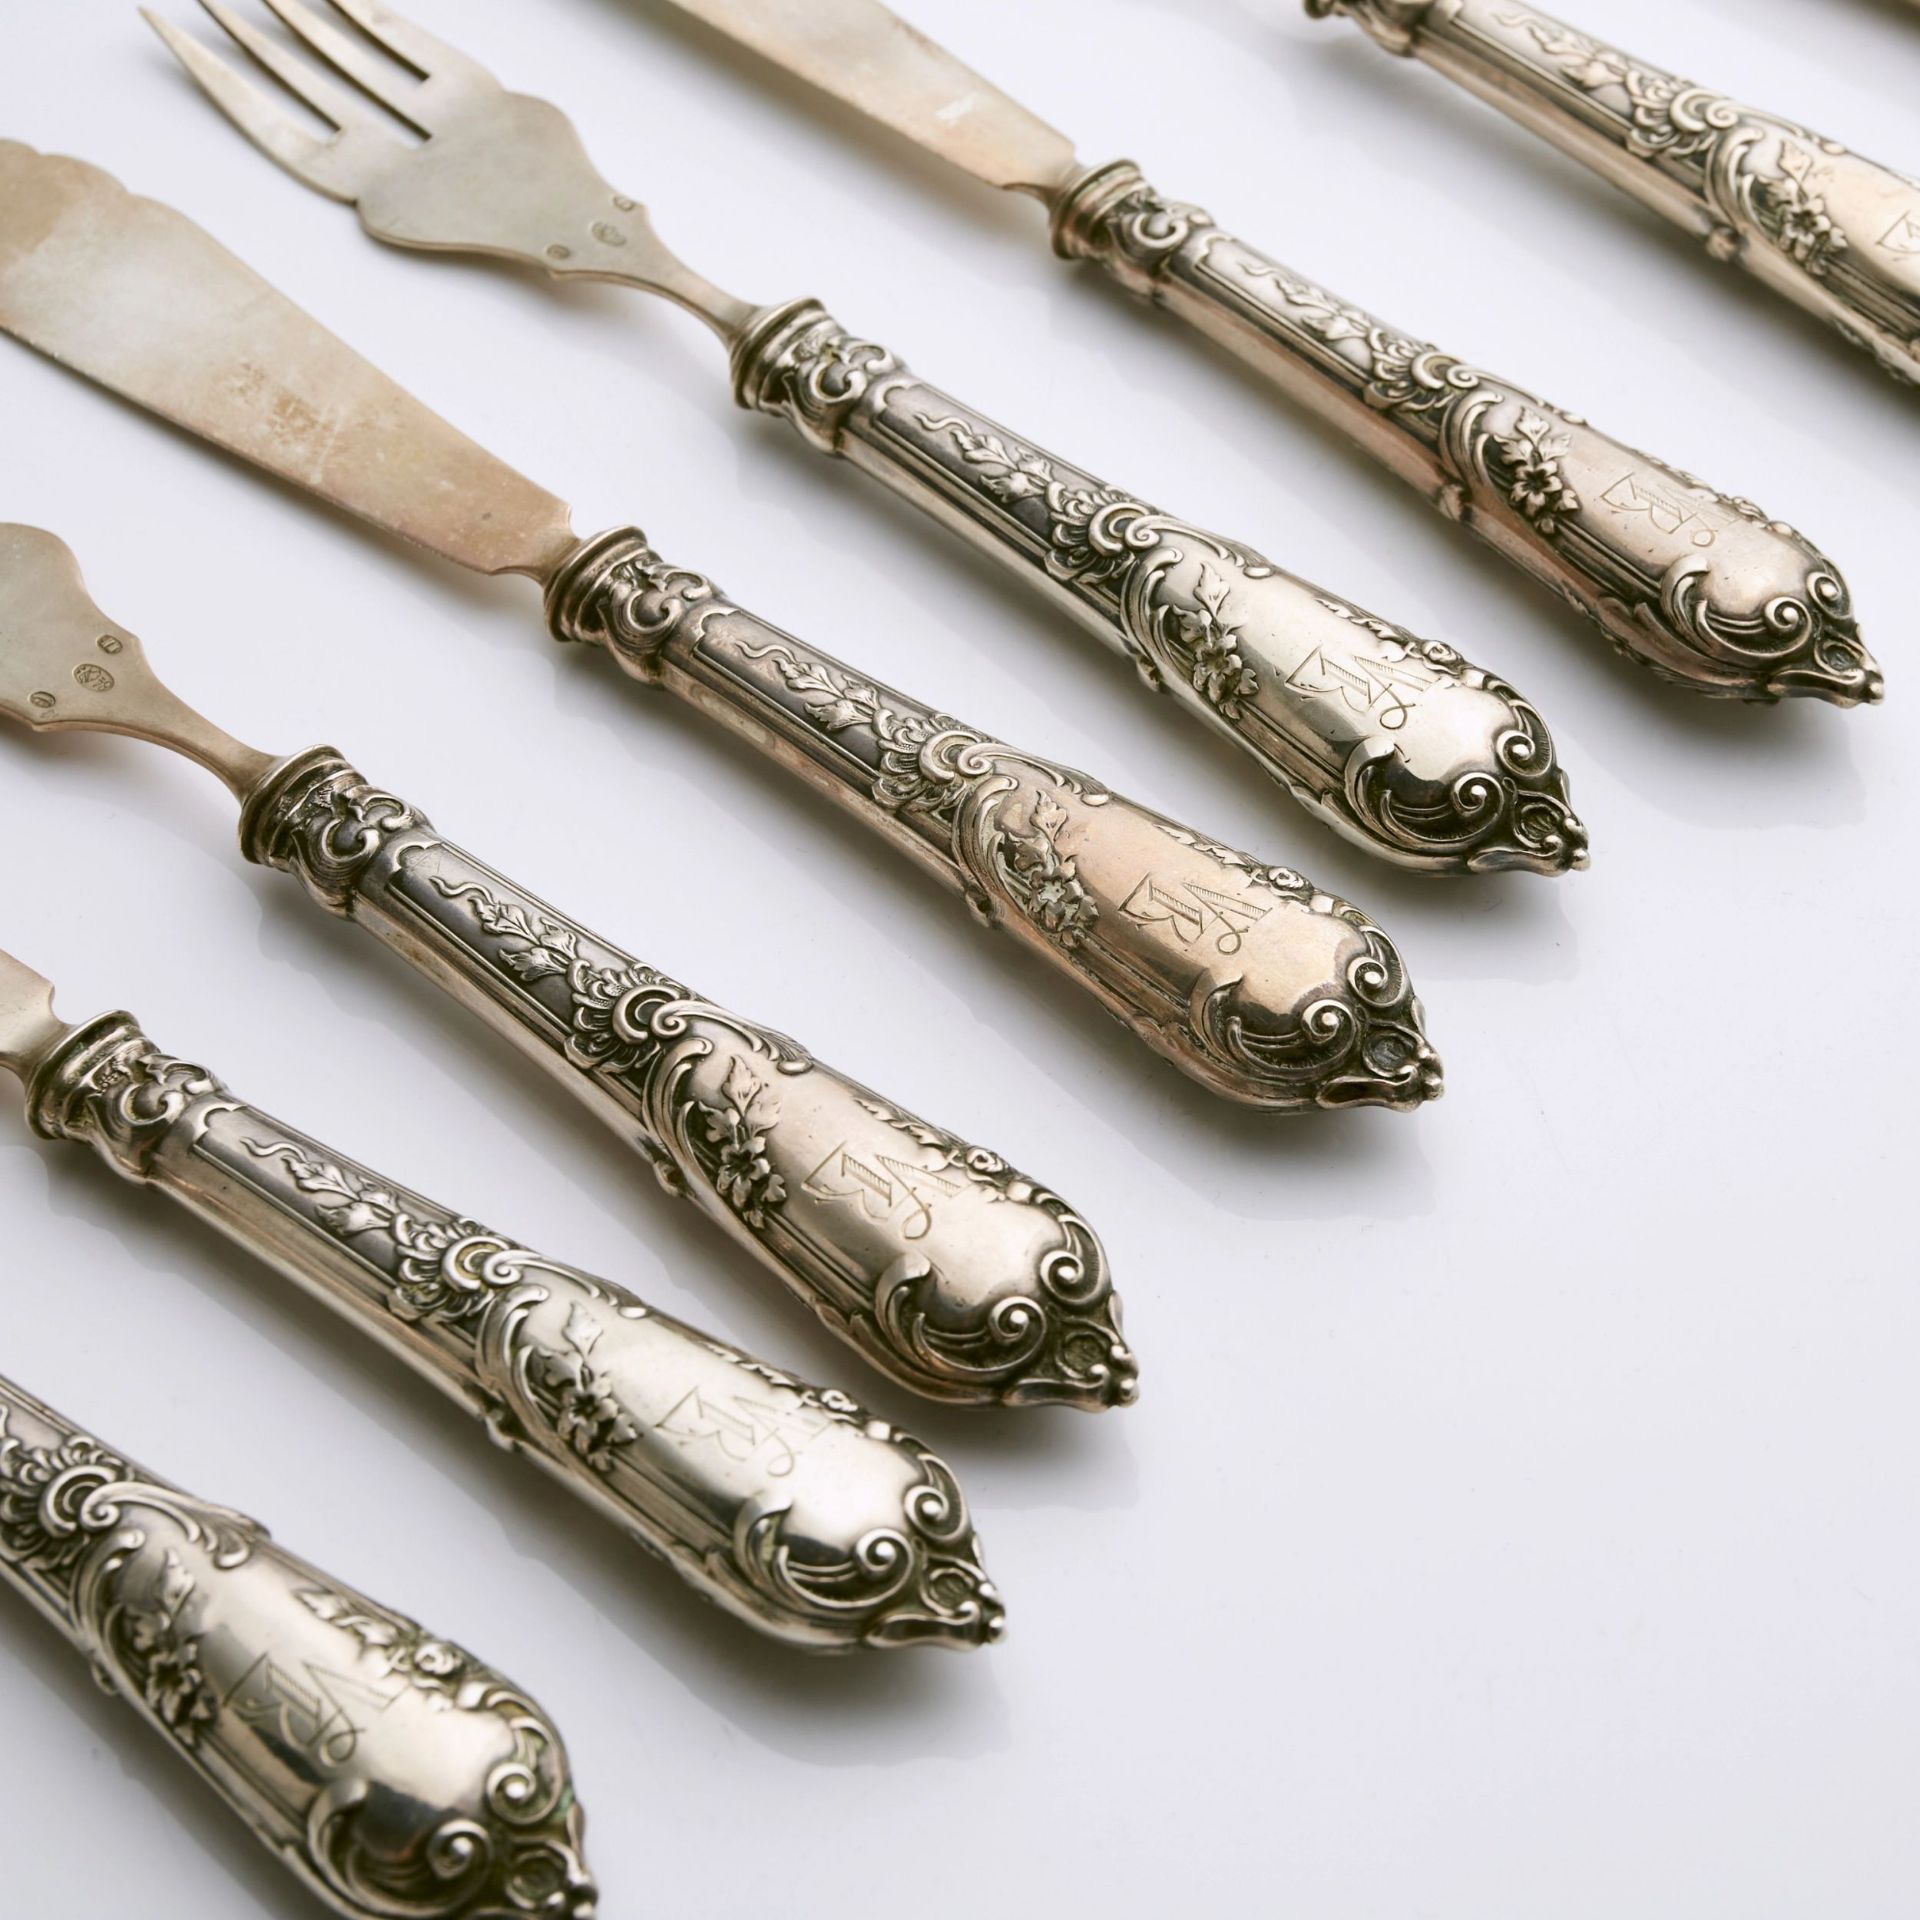 Silver set for fish table. Royal Russia. - Image 3 of 6